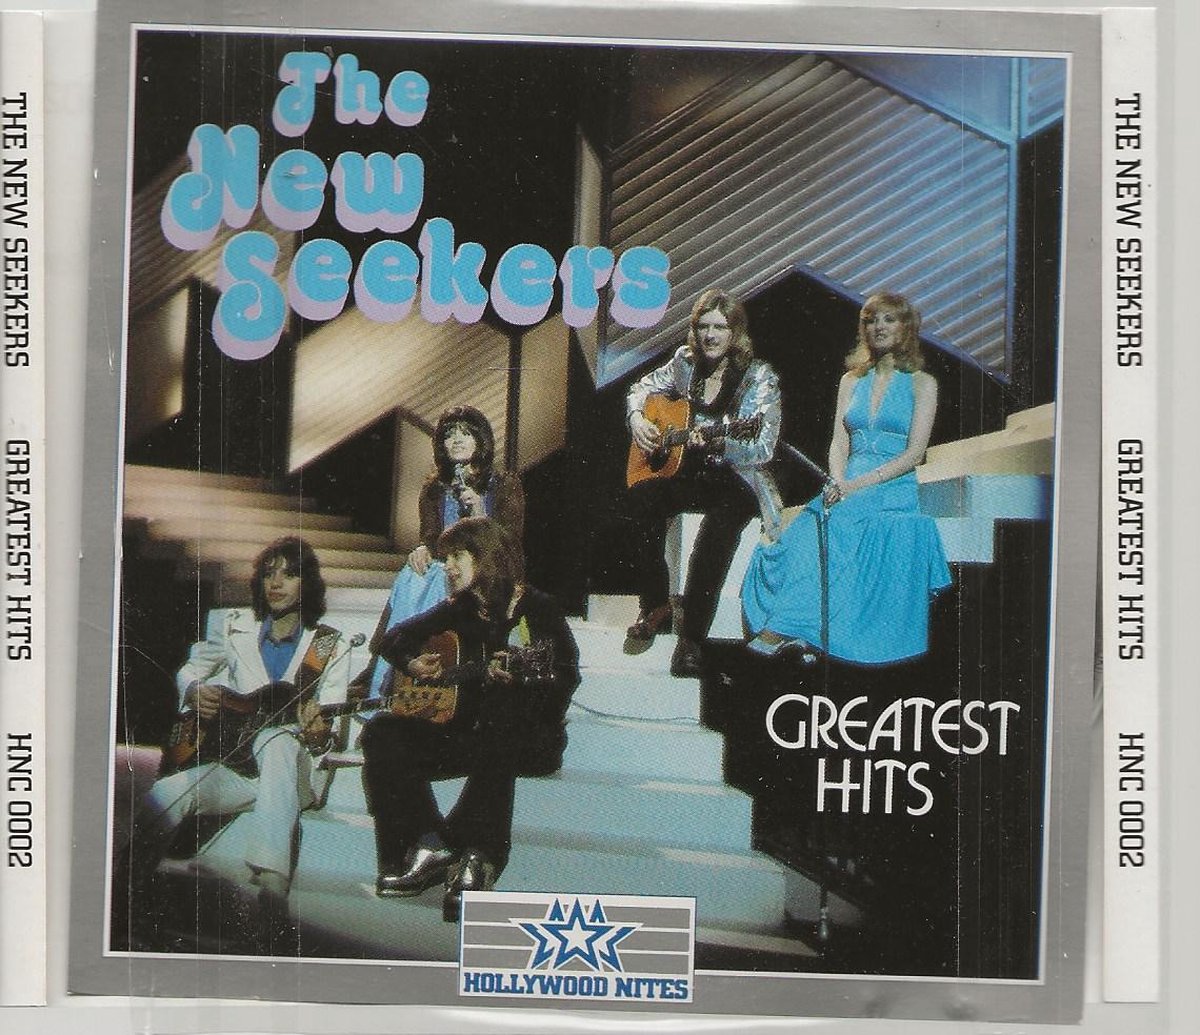 Cd The NEW SEEKERS GREATEST HITS 16 TRACKS - The New Seekers